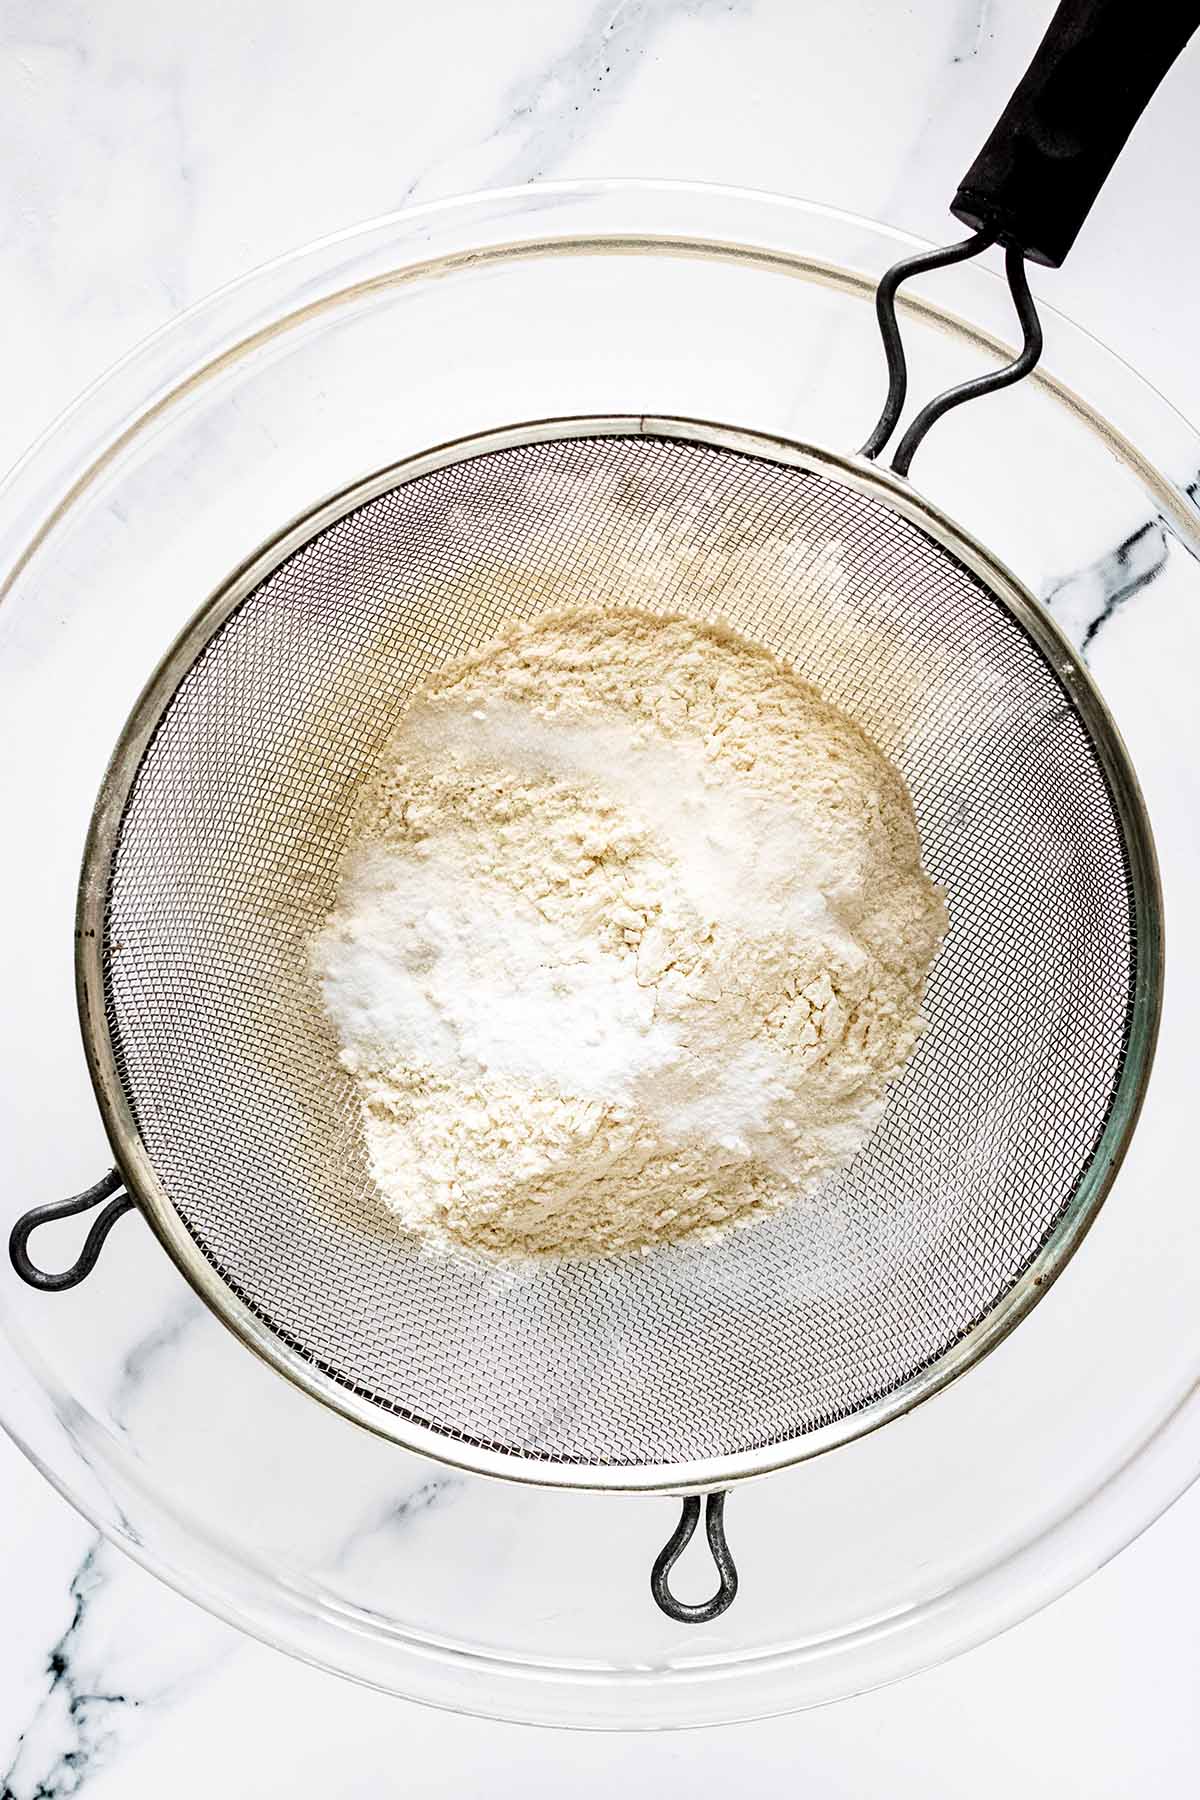 Overhead view of dry ingredients being sifted into a large glass bowl